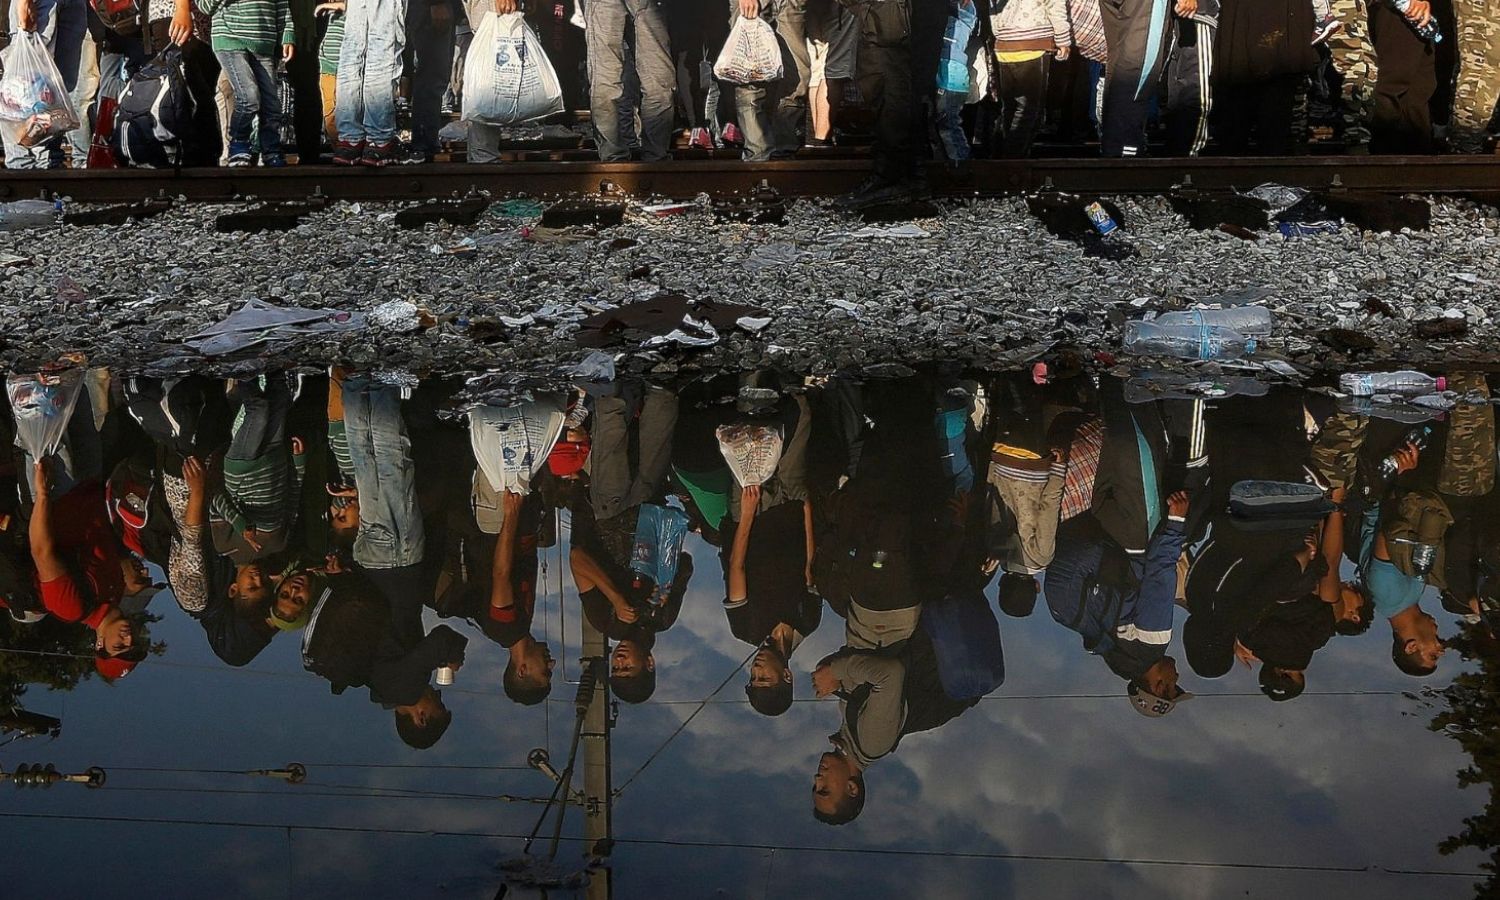 Syrian refugees on the Greek border, their bodies reflected in the water, while waiting to enter the Macedonian border in September 2015 (Reuters)